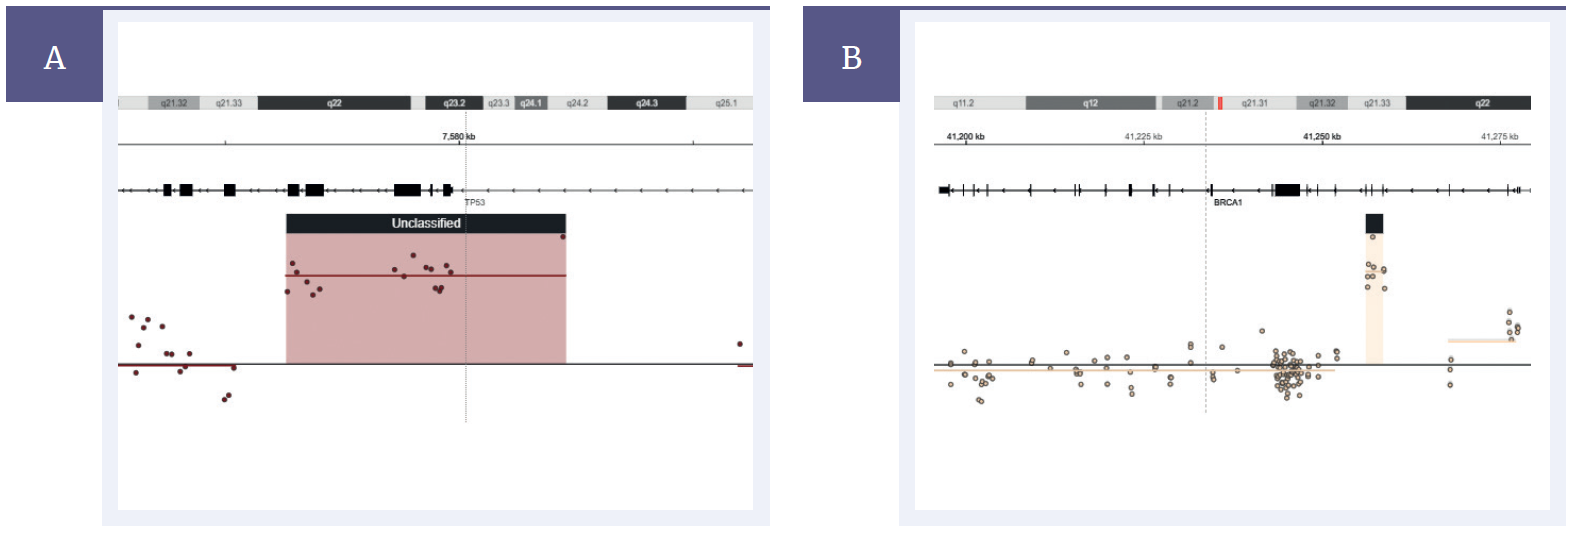 Figure 3: Detection of germline duplications in TP53 and BRCA1. [A] TP53 duplication of exons 2-6 (2.99kb) and [B] BRCA1 duplication of exons 4-6 (2.45kb).